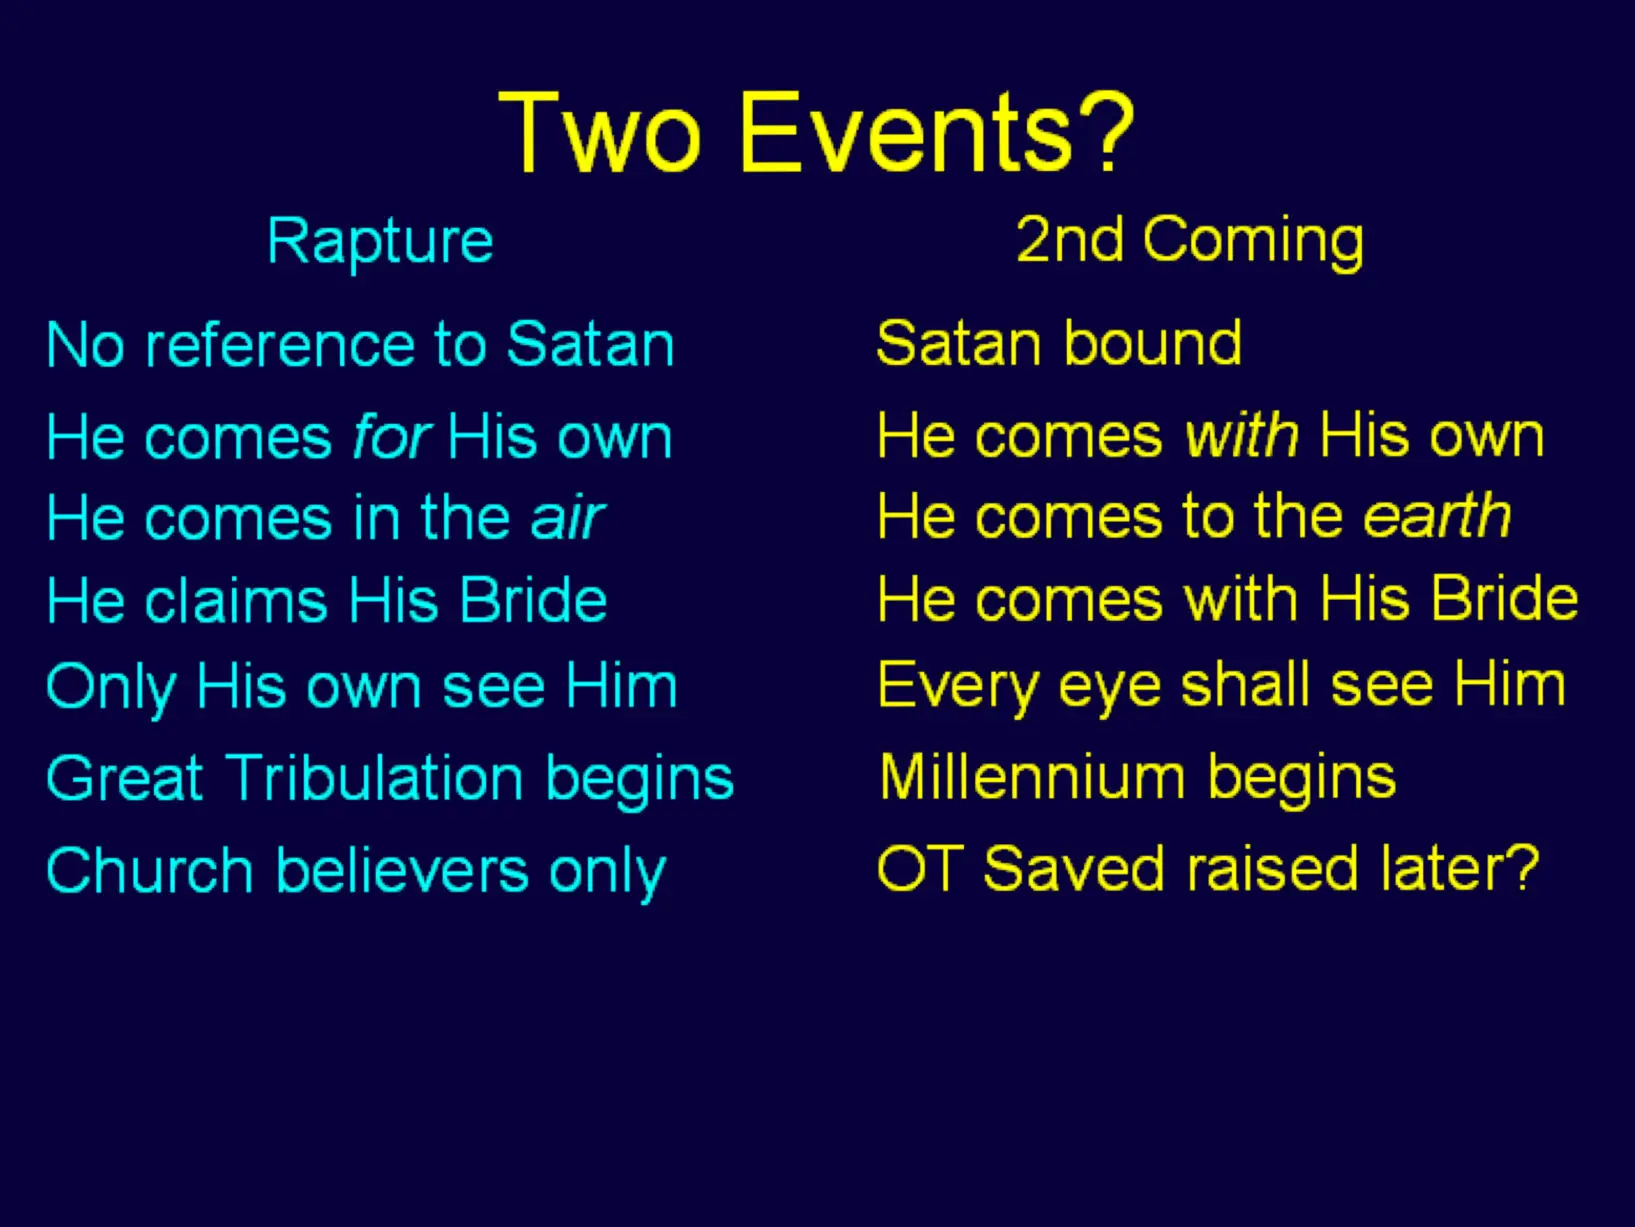 Rapture vs 2nd Coming